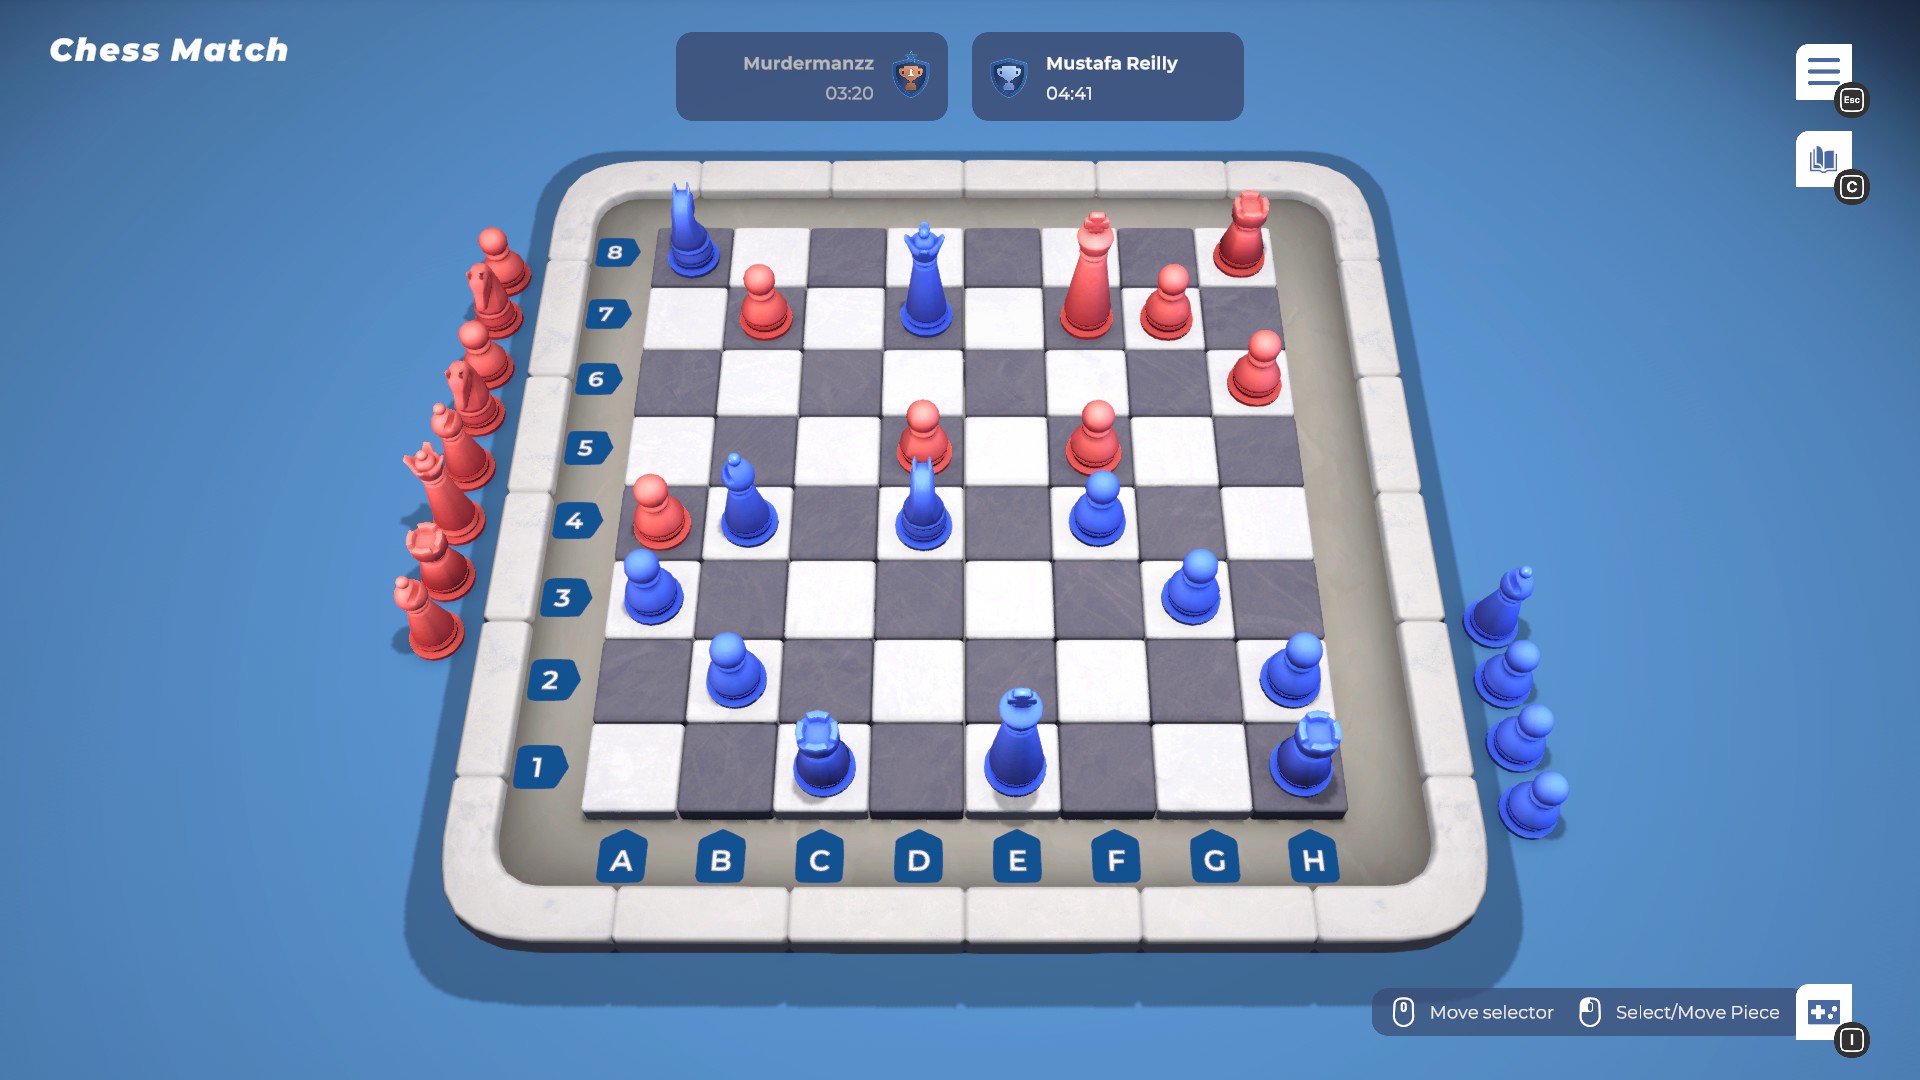 Get Ready for Chessarama on Xbox with a Chance to Win a Board